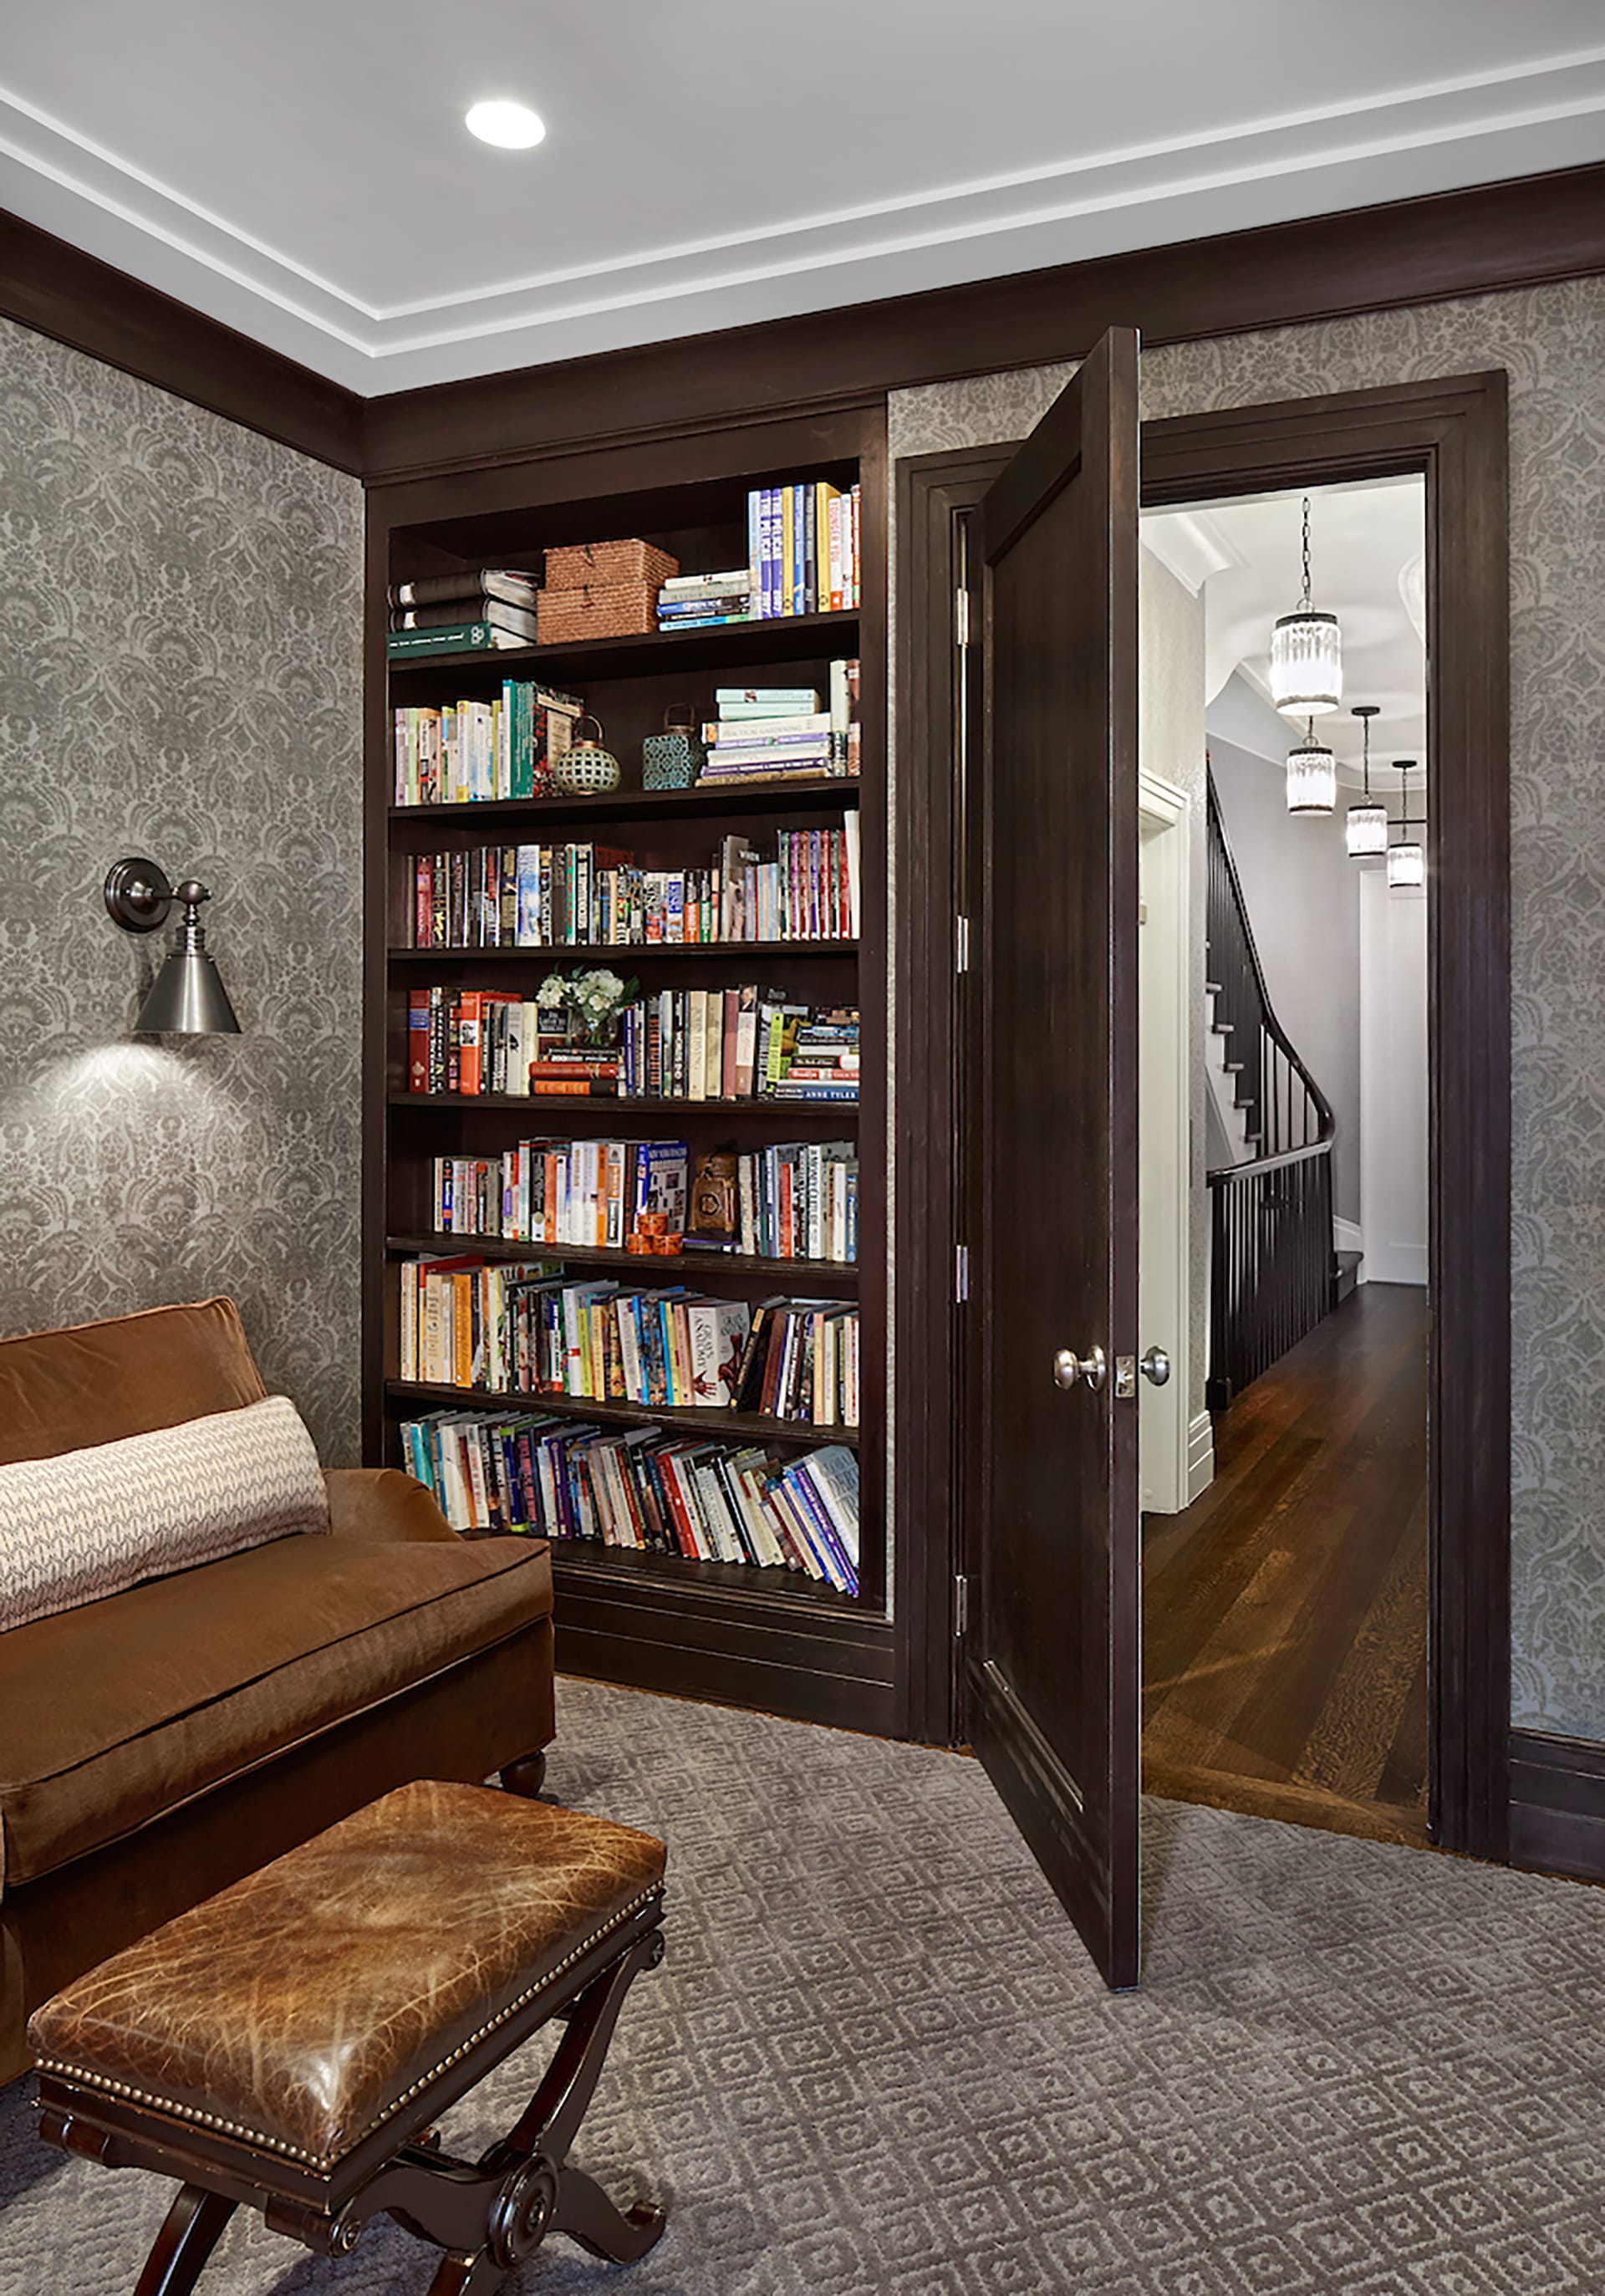 Library with grey patterned wallpaper, dark wood door and accents, and built-in bookshelves.